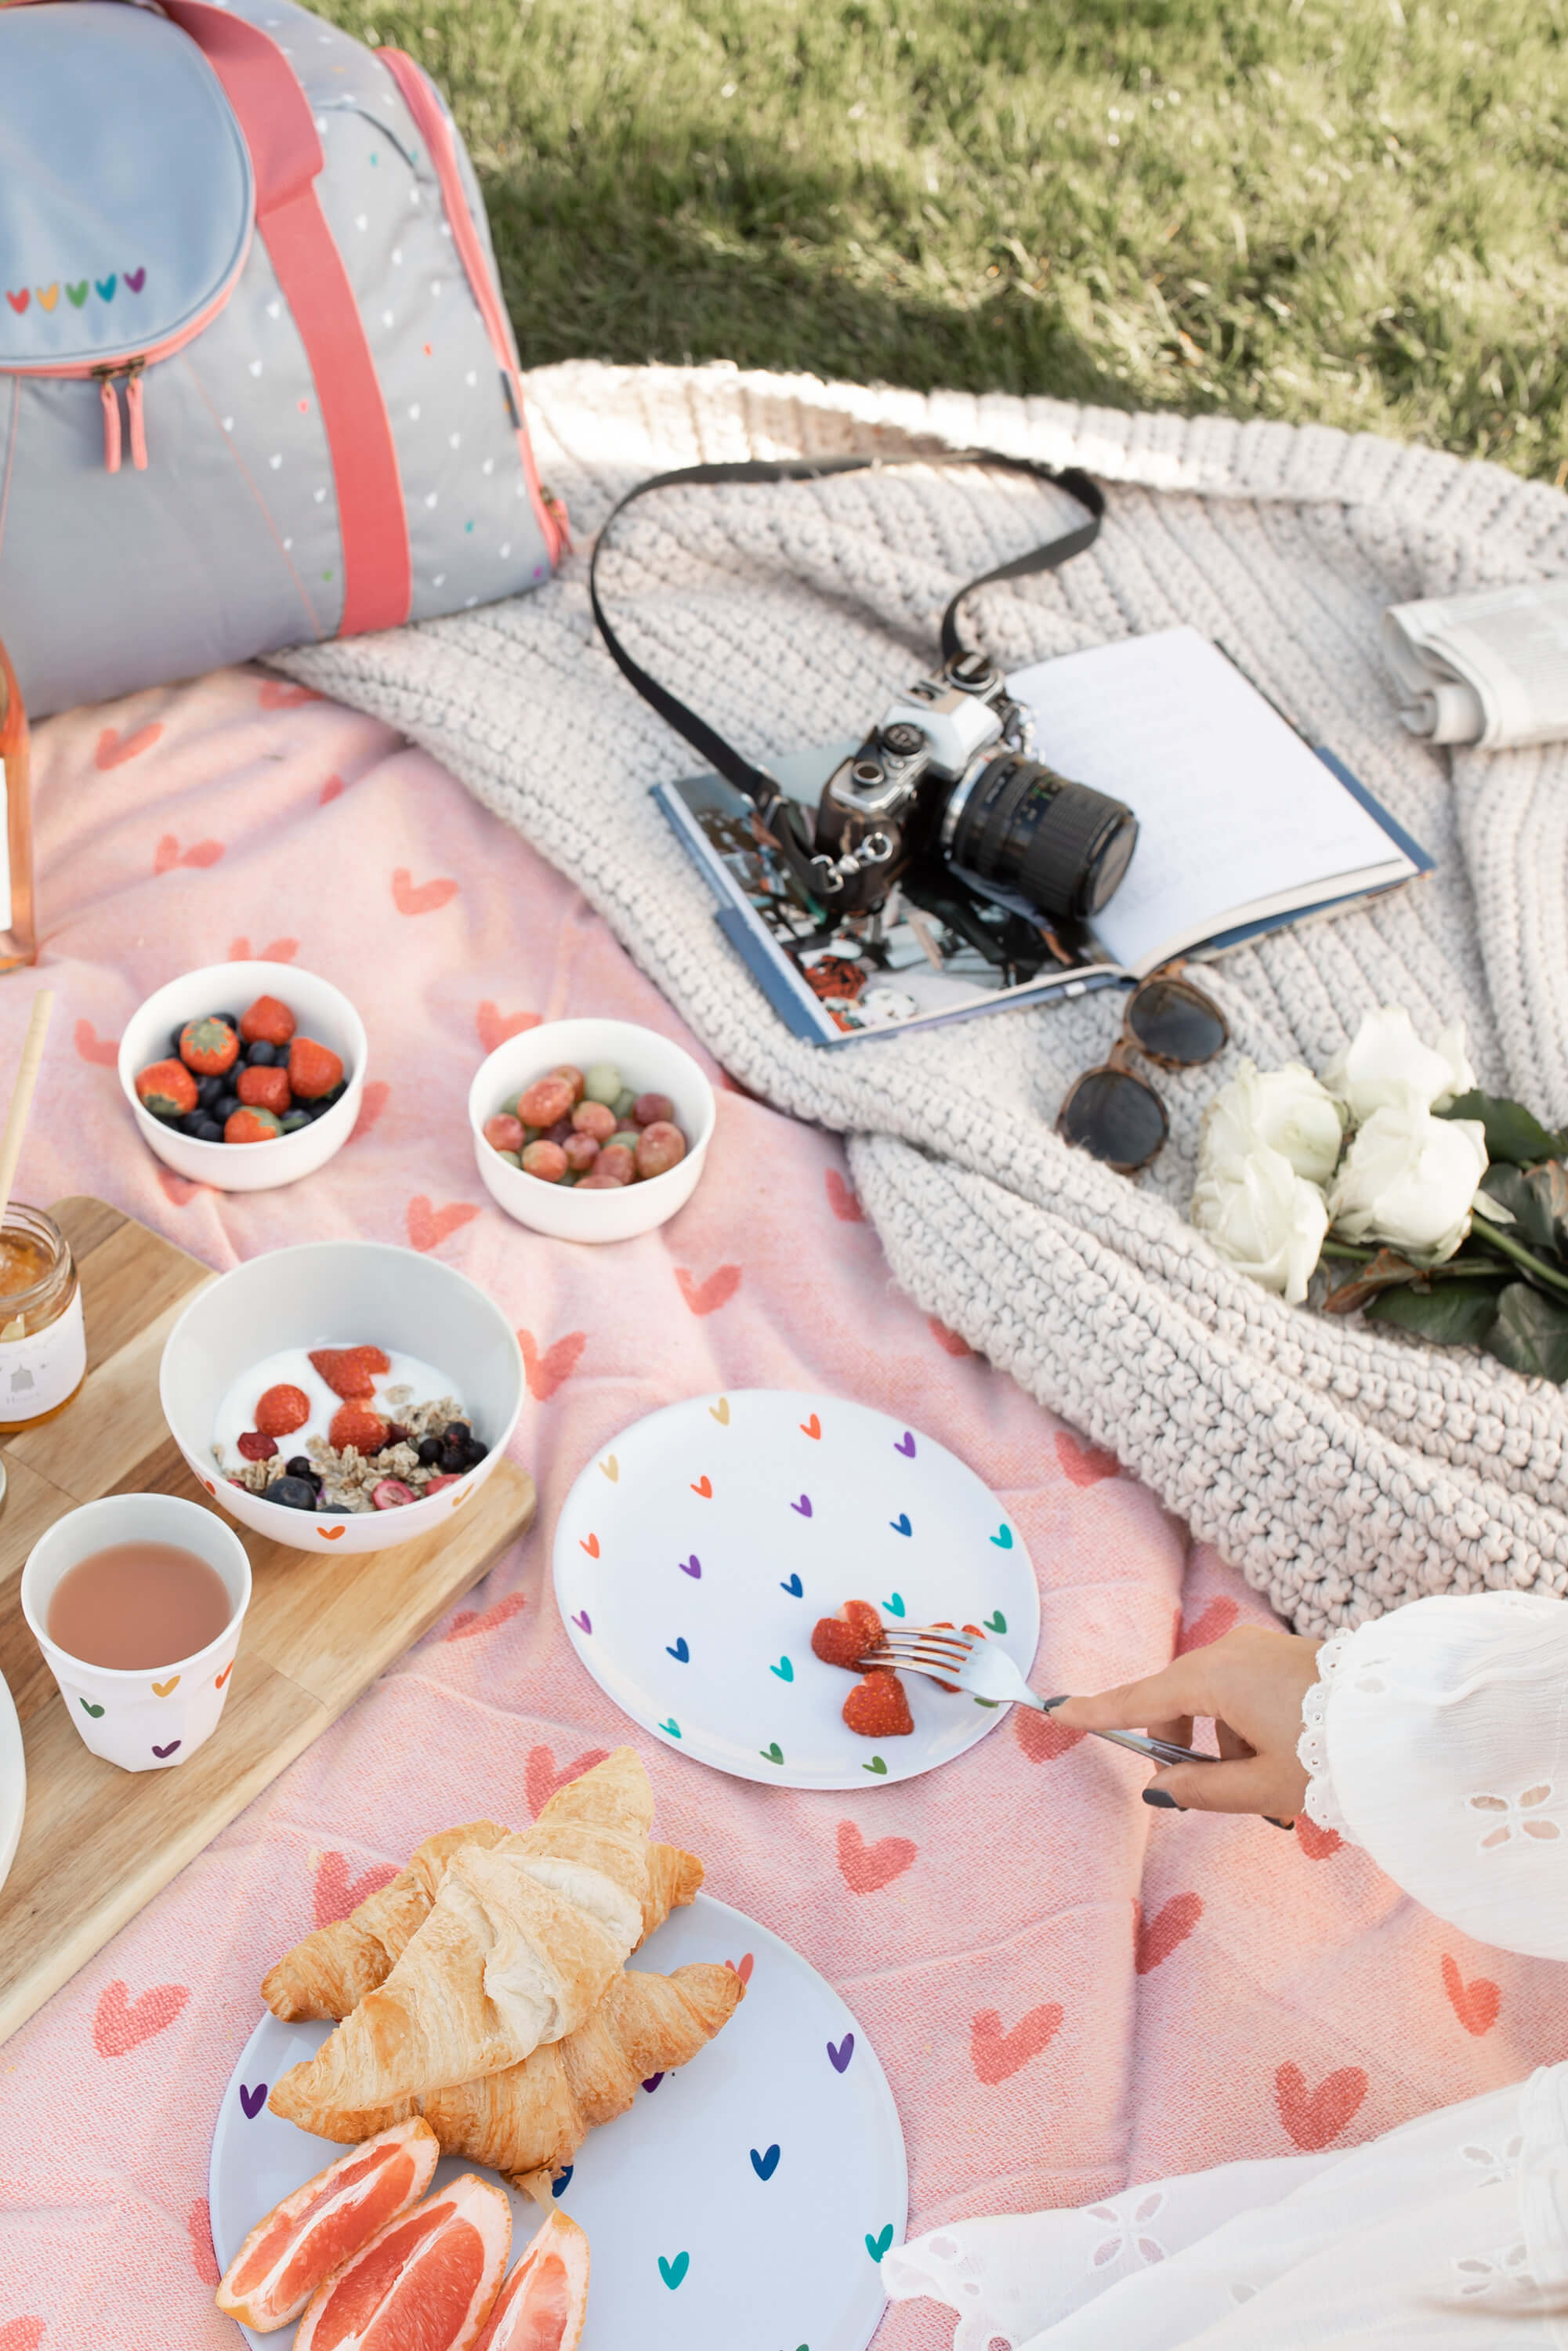 Picnic set up in the park with summer fruit